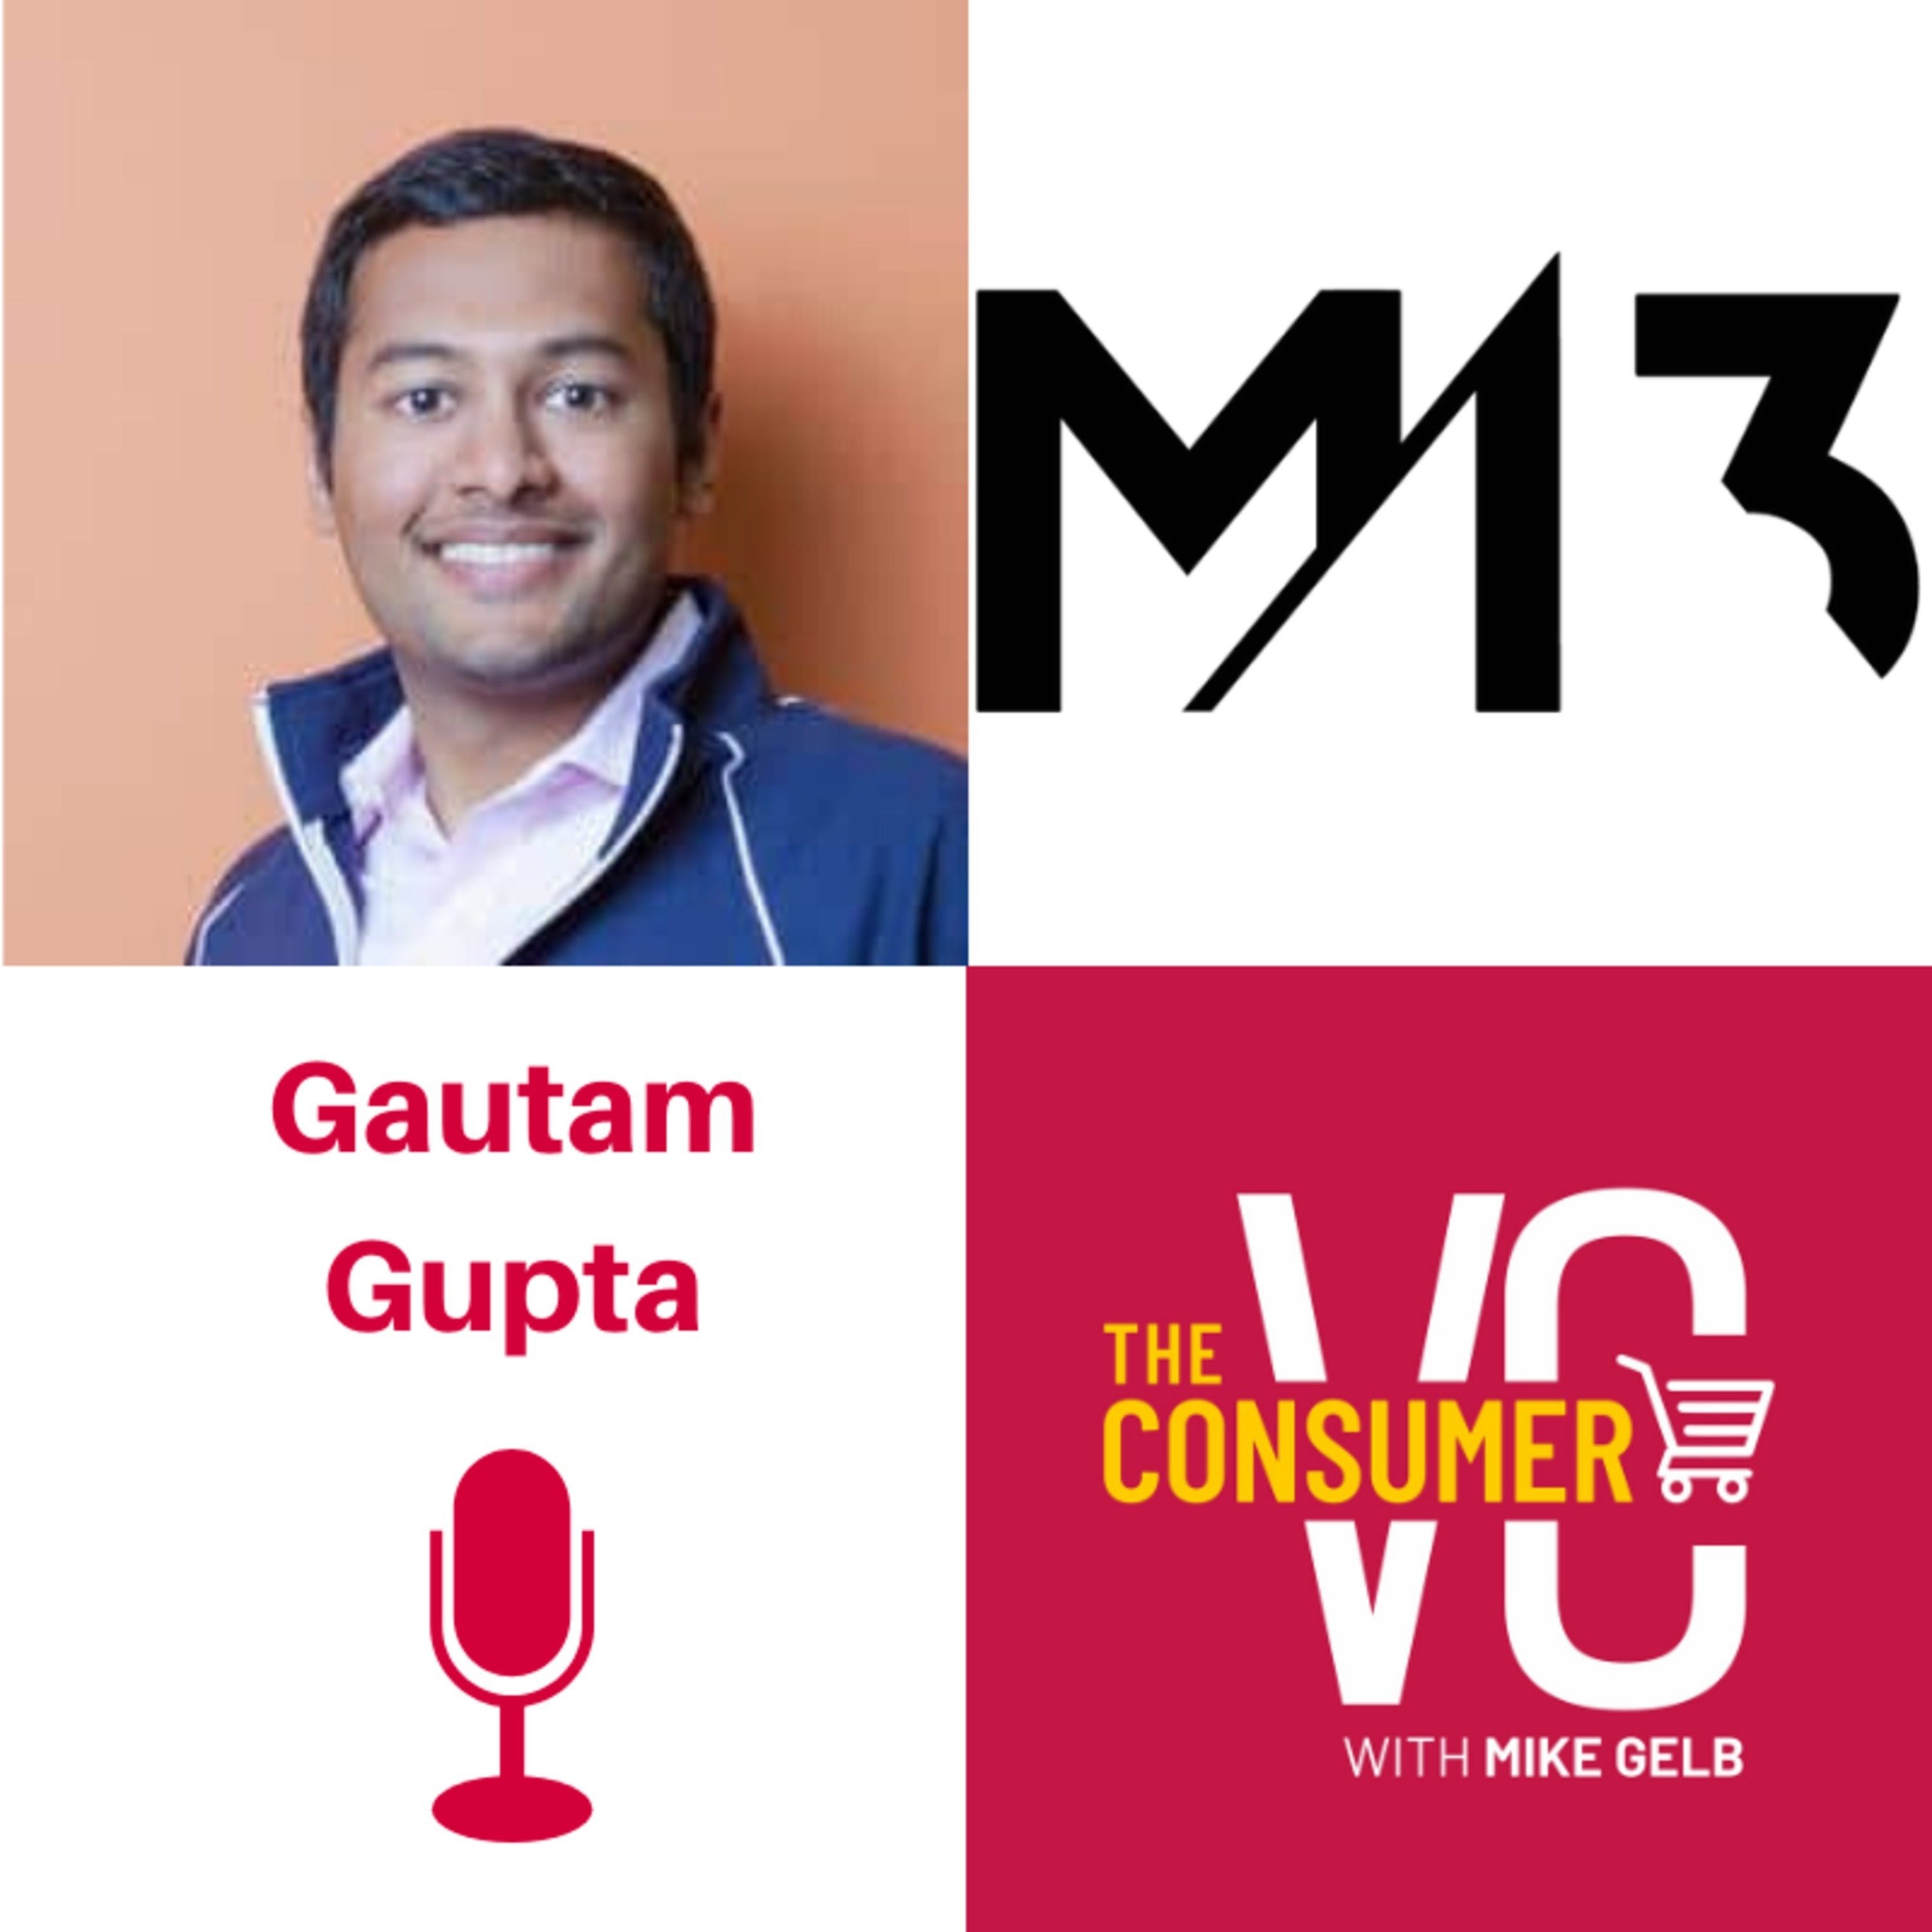 Gautam Gupta (M13) - The Thin Line Between Success and Failure, Board Construction, and Why He Offers Learnings, Not Advice